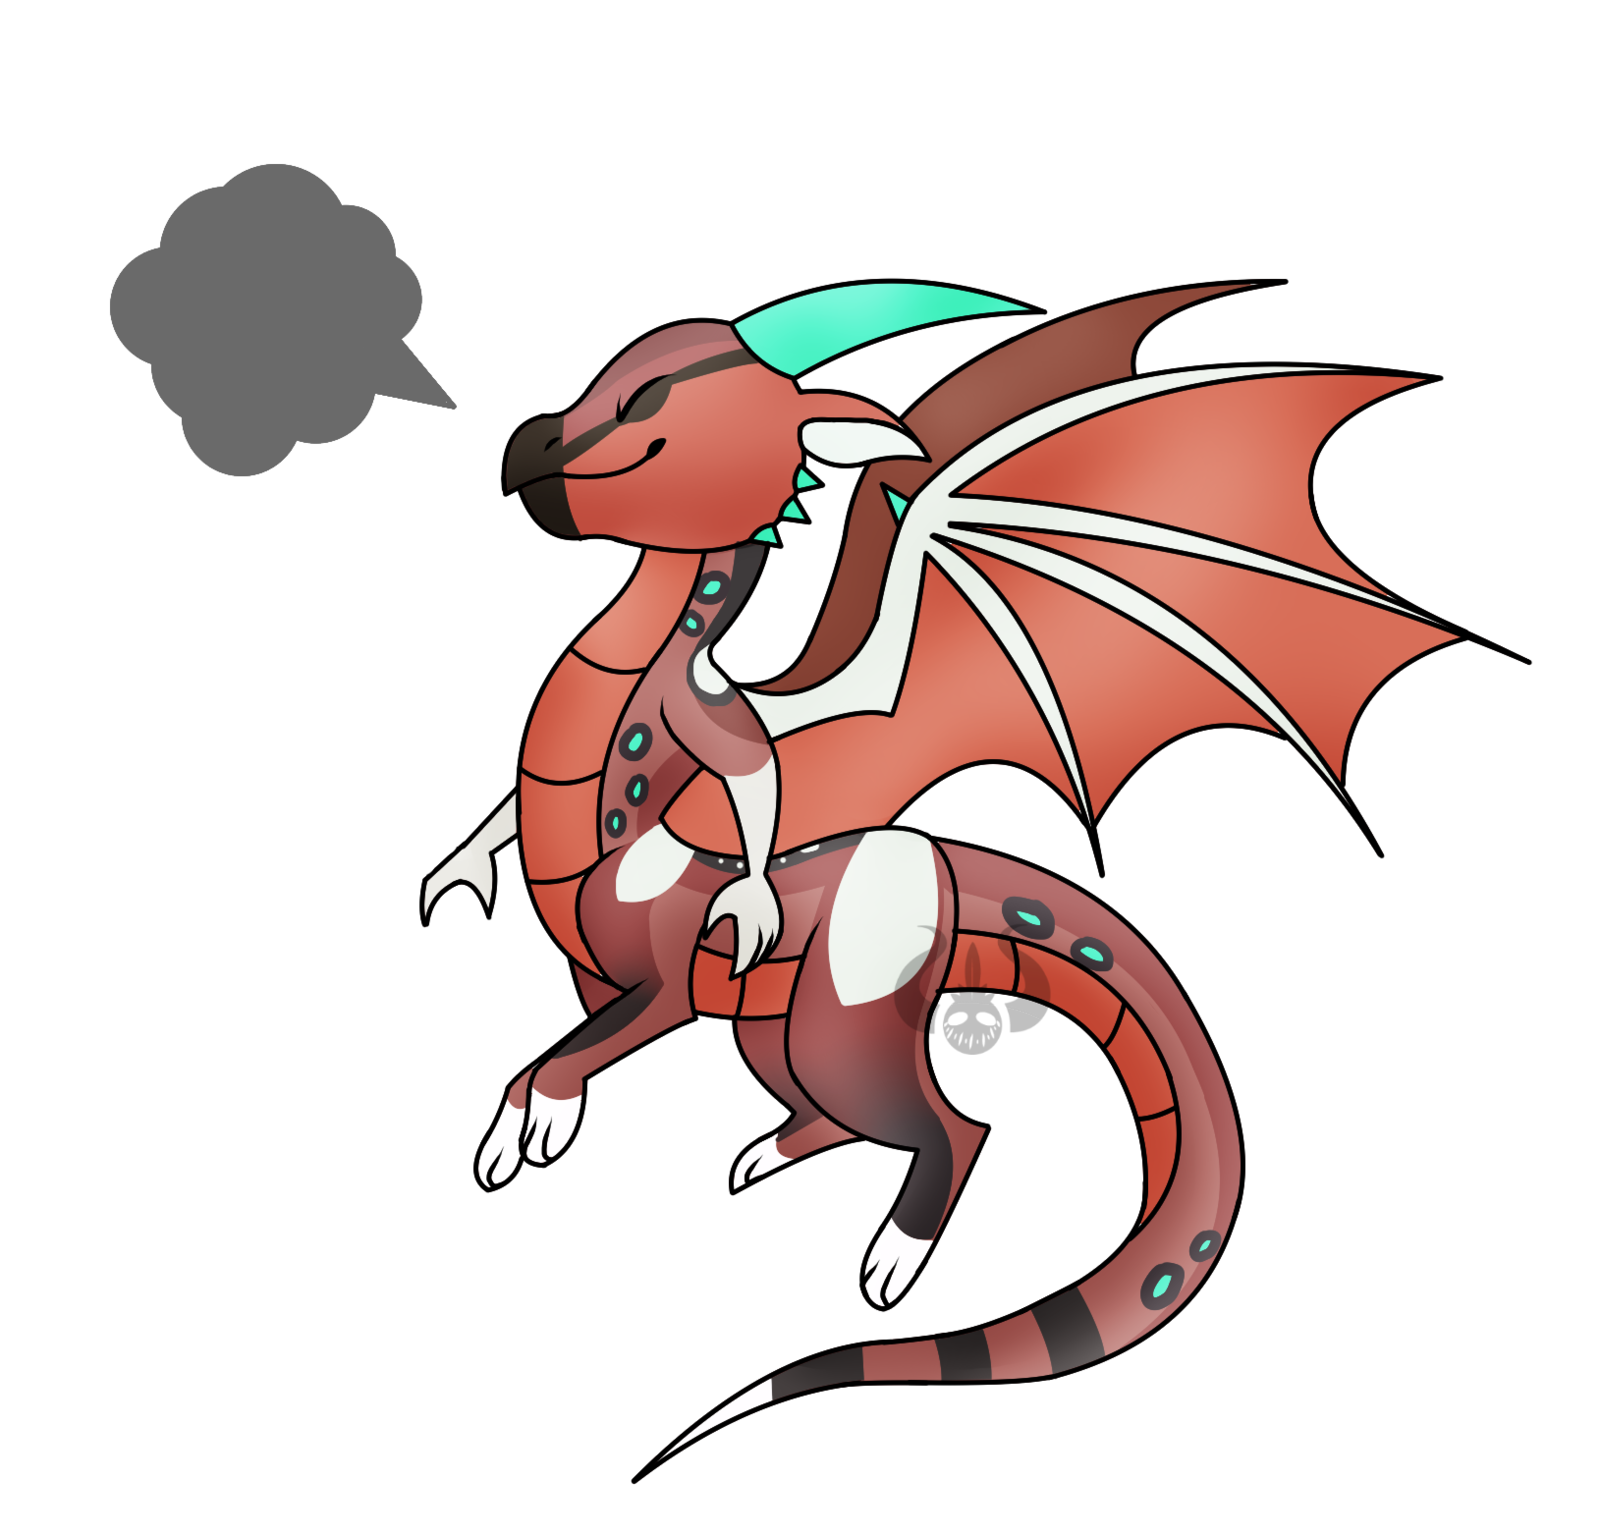 Comm by ghxstlly on. Clipart dragon puff the magic dragon